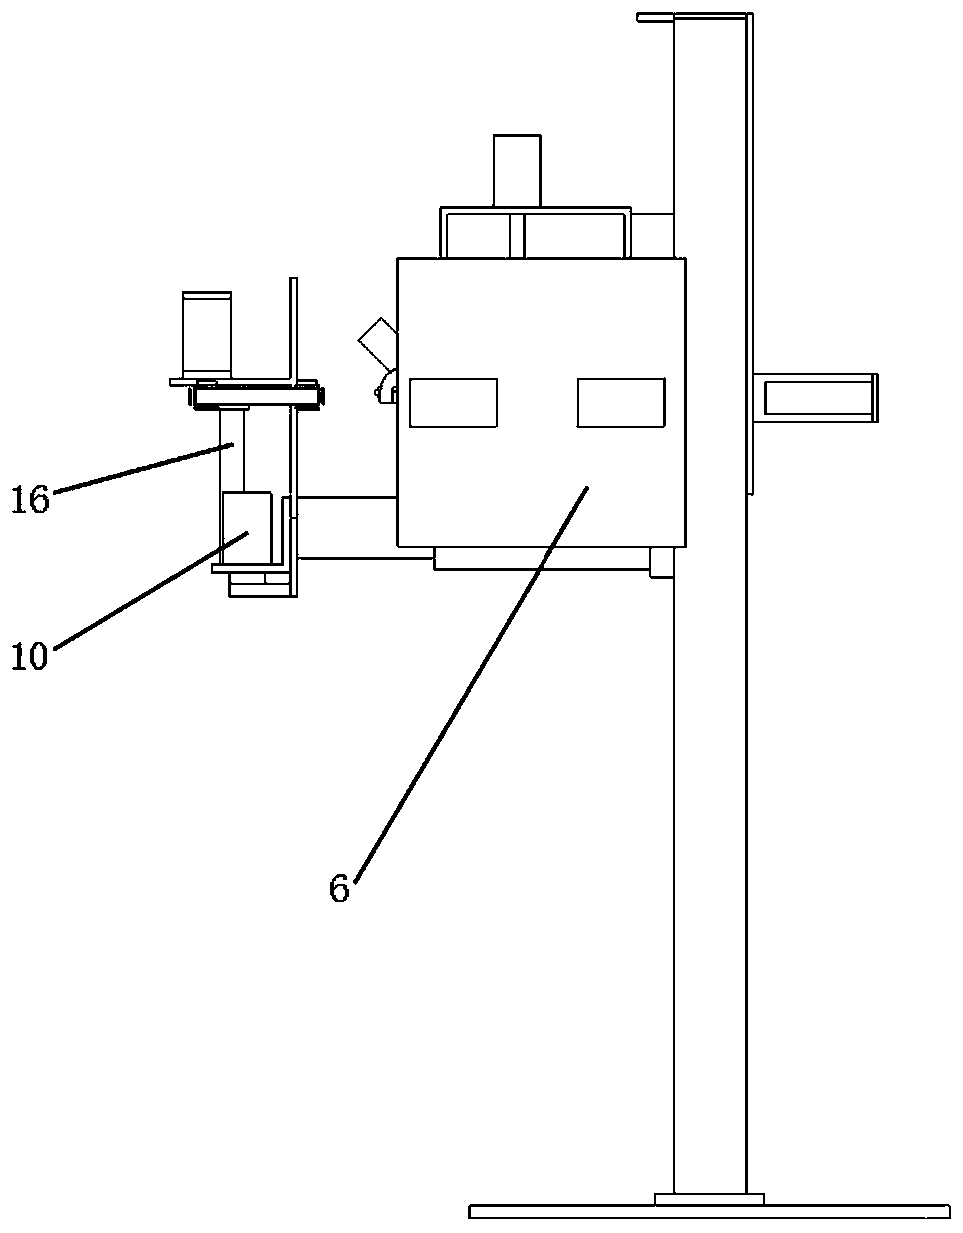 Reeled yarn automatic stock splitting, line binding and knotting device